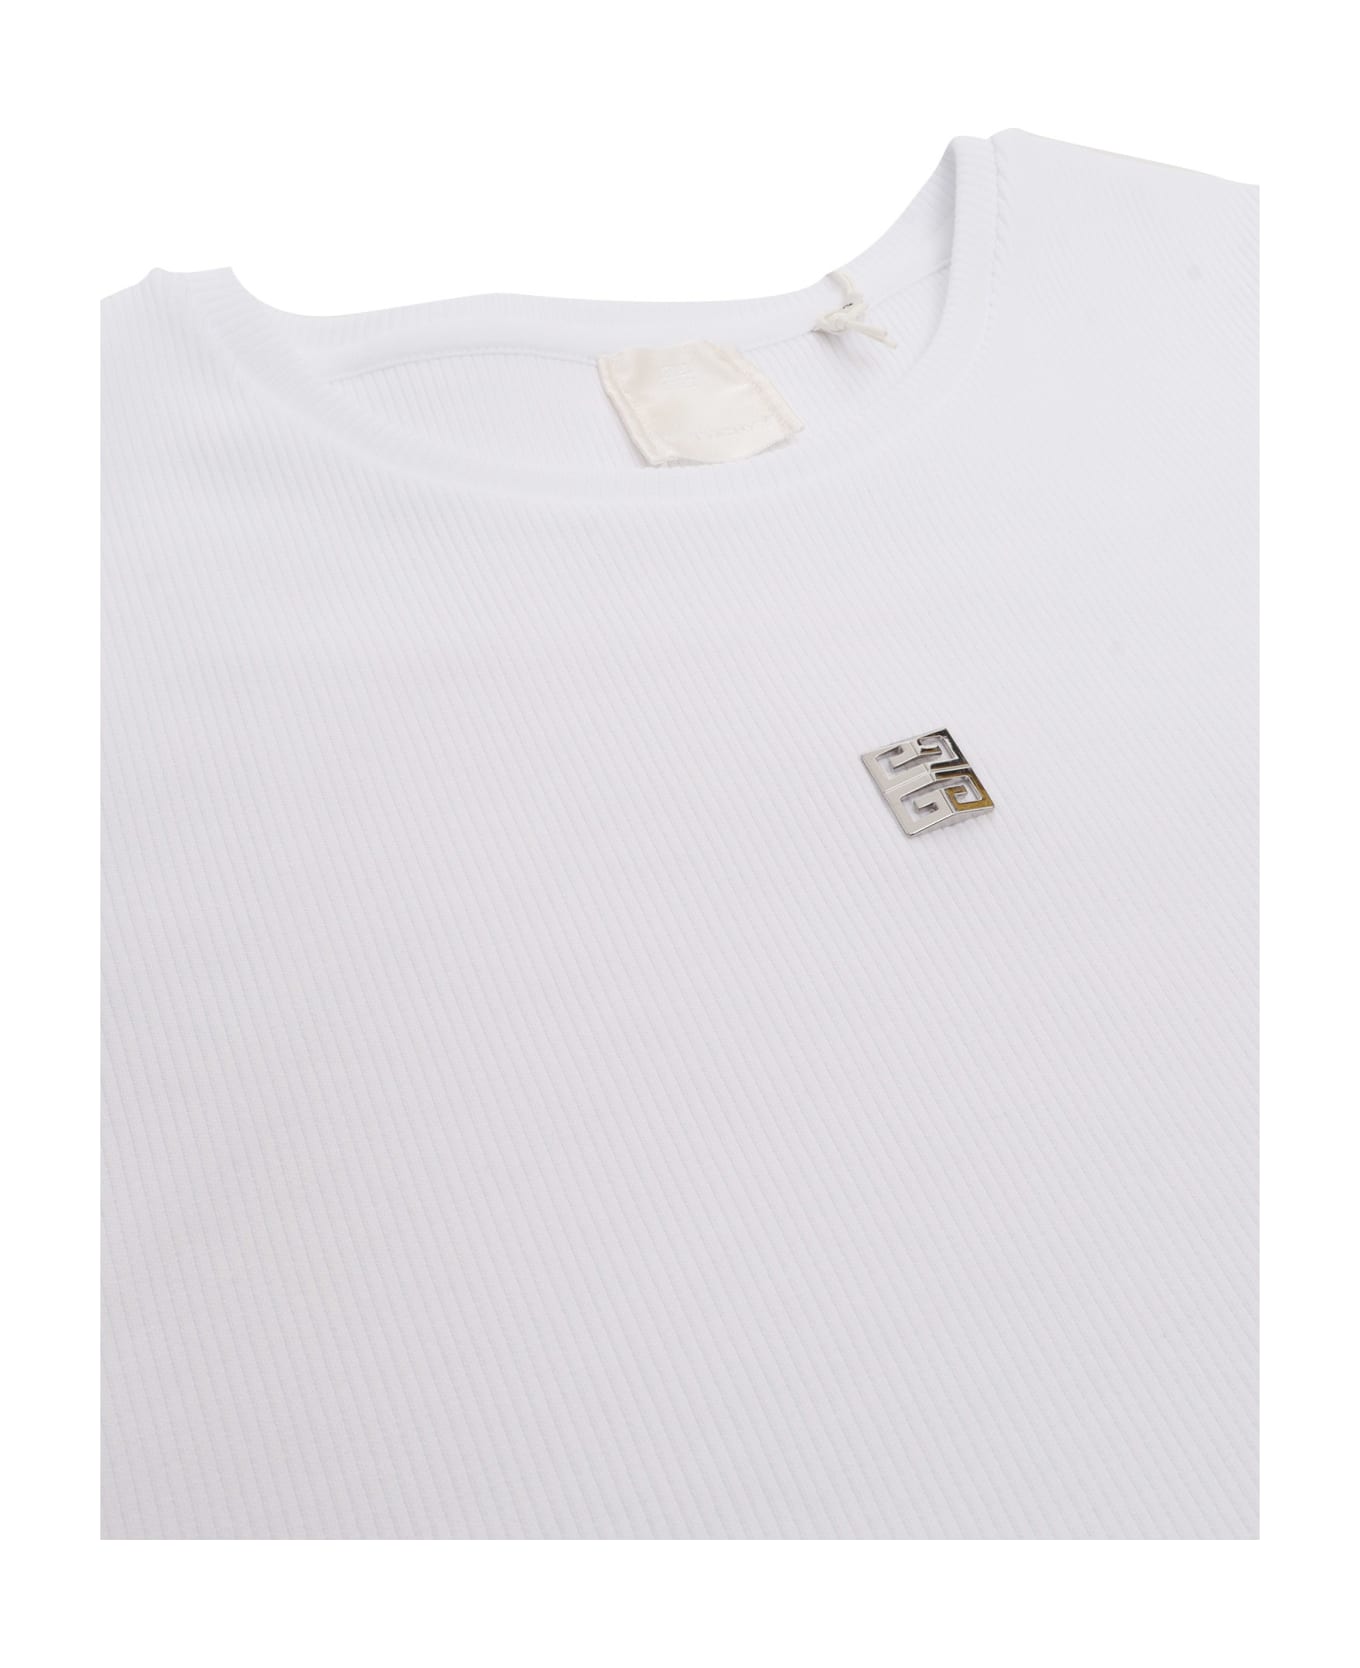 Givenchy White Cropped T-shirt - WHITE Tシャツ＆ポロシャツ